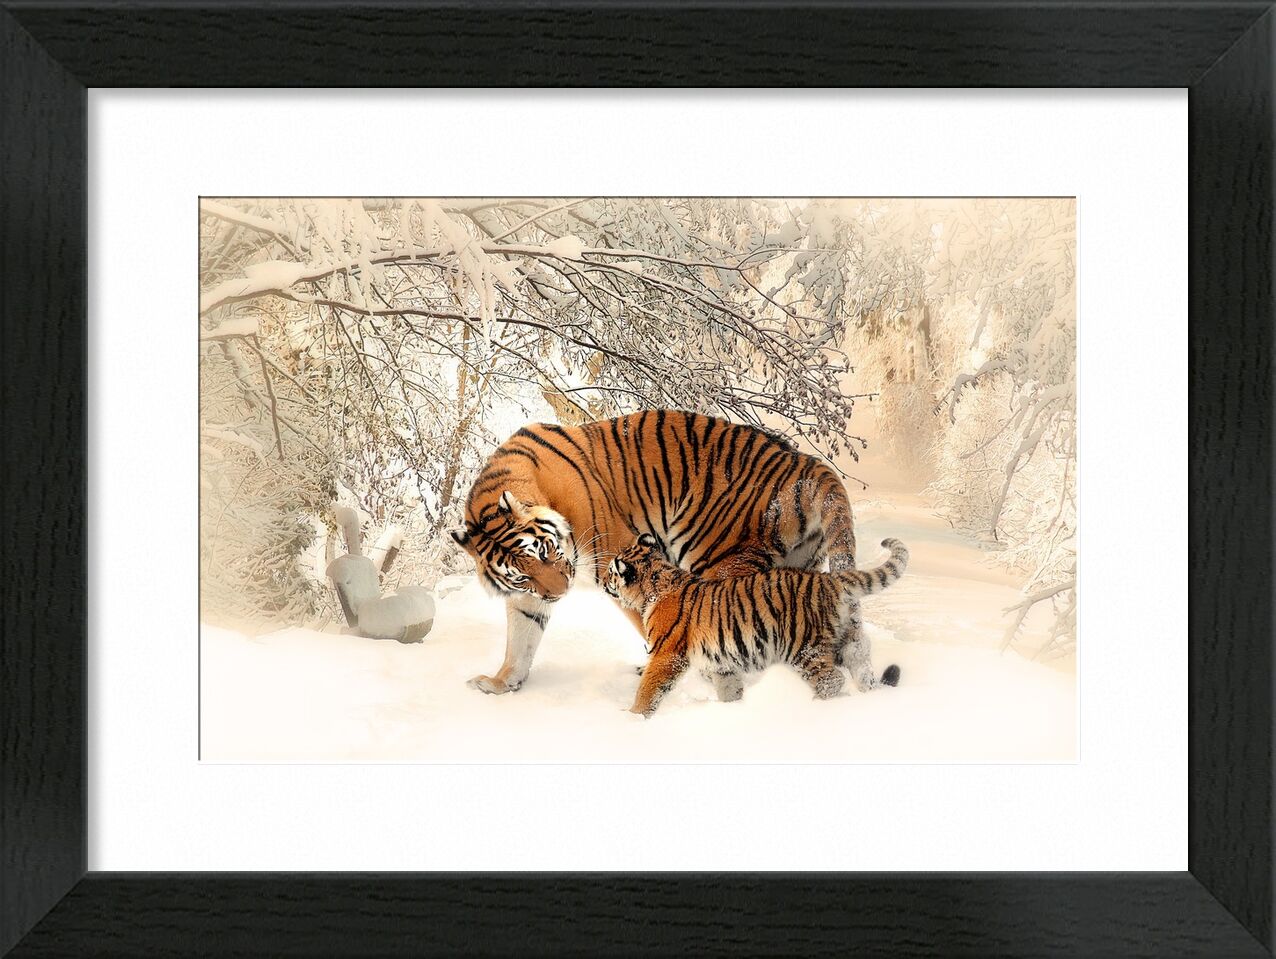 Tigers in the snow from Pierre Gaultier, Prodi Art, tiger, young, forest, winter, mood, play, beautiful, tiger baby, tigerfamile, family, panthera tigris altaica, young animal, wilderness, outdoor